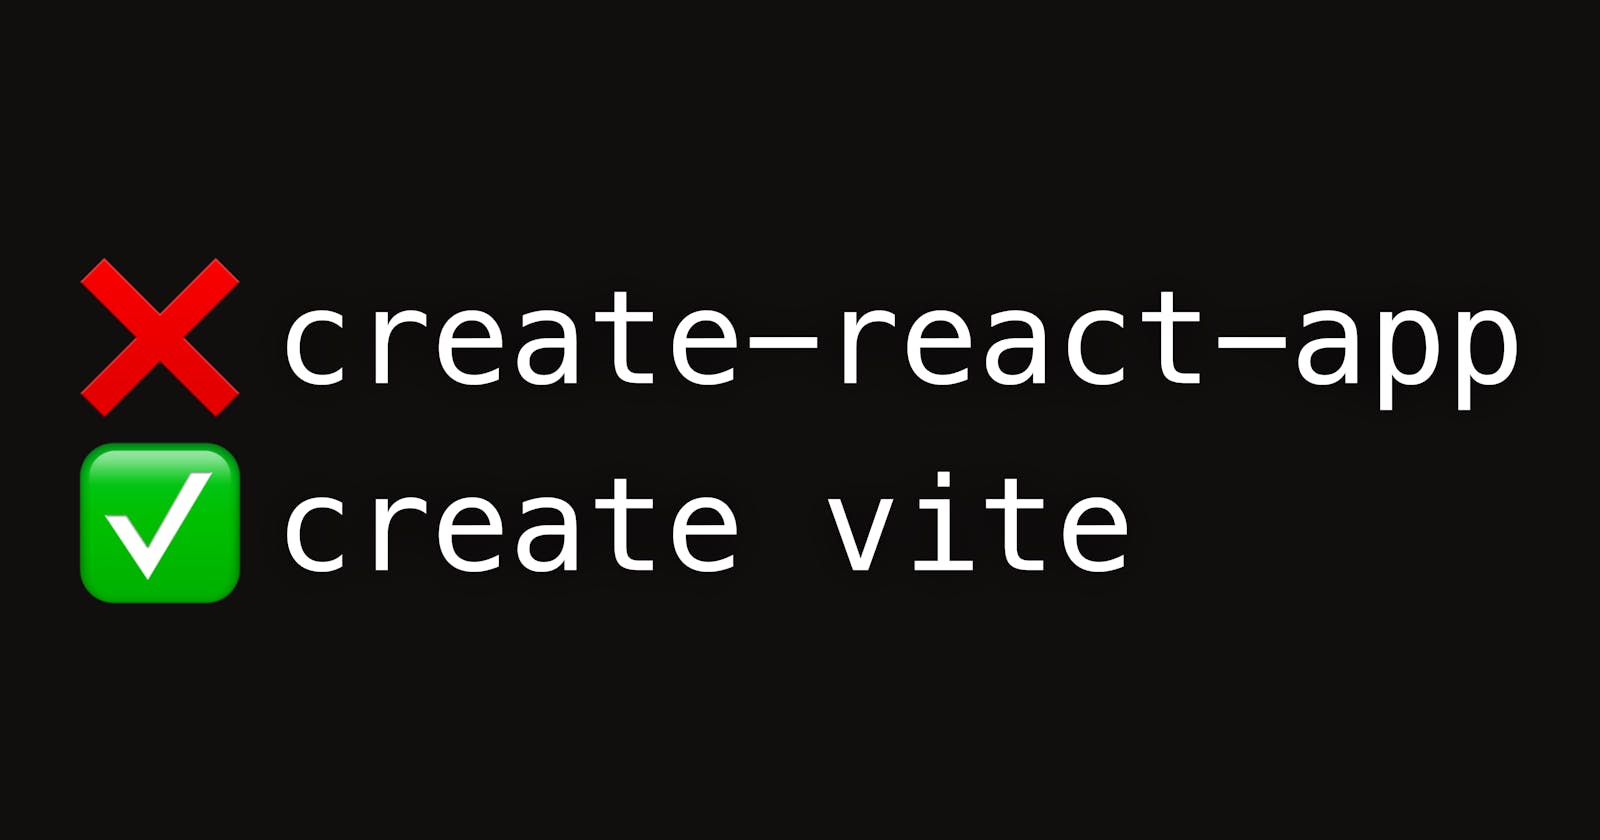 Don't use create-react-app anymore, try these